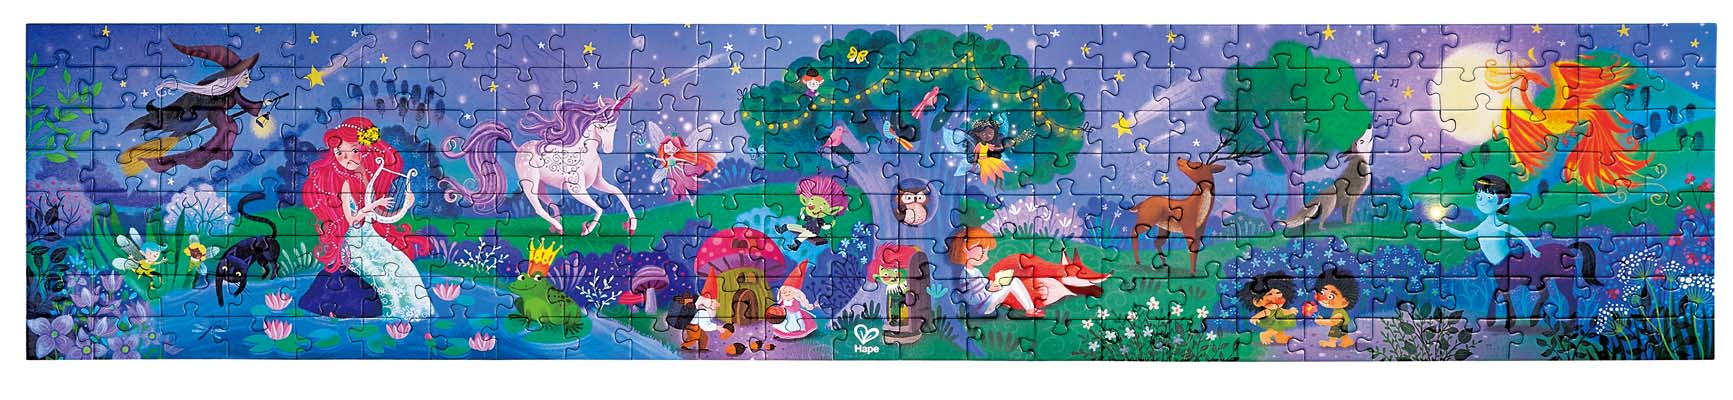 Hape | 200pc Glowing Puzzle - Magic Forest